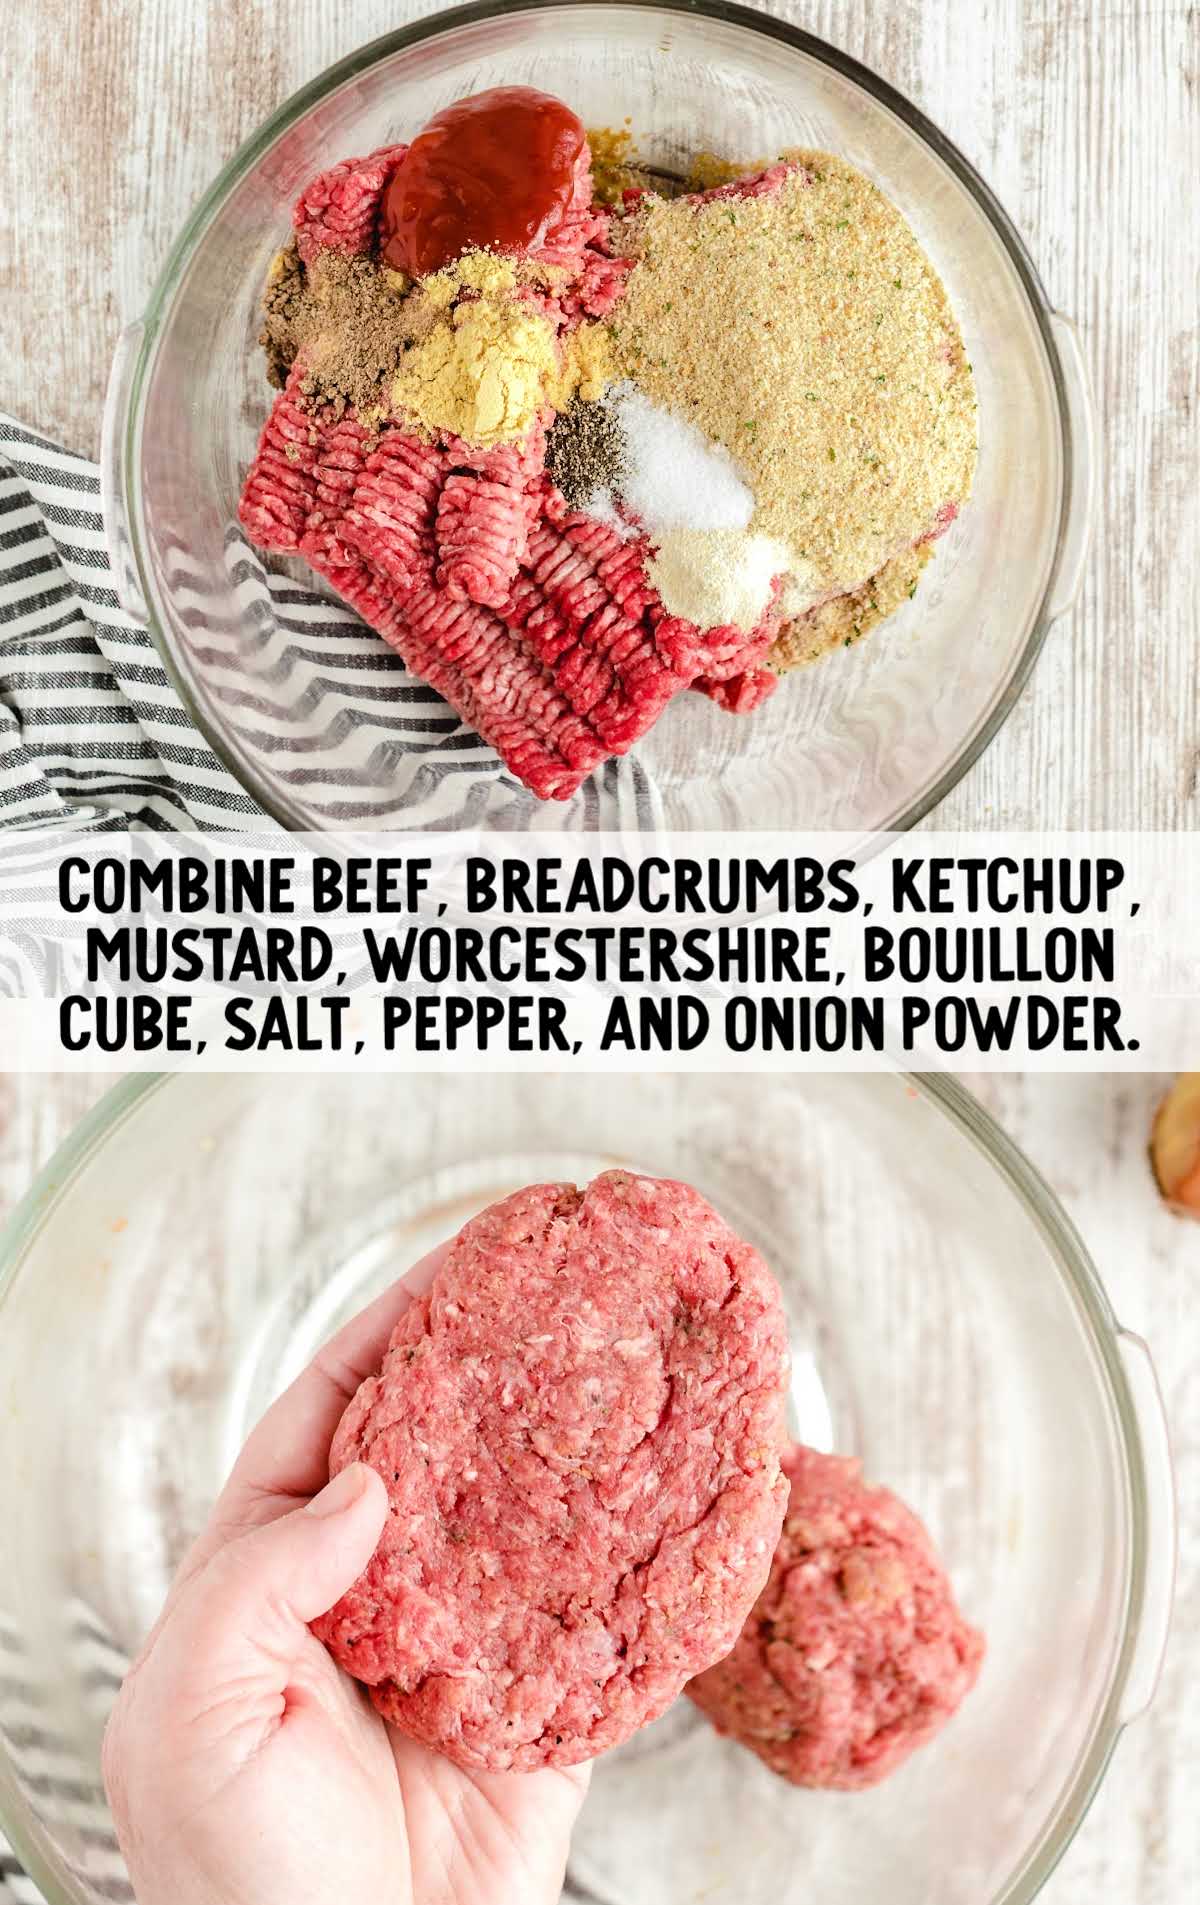 beef, breadcrumbs, ketchup, mustard, Worcestershire, bouillion, cube, salt, pepper, and onion powder combined